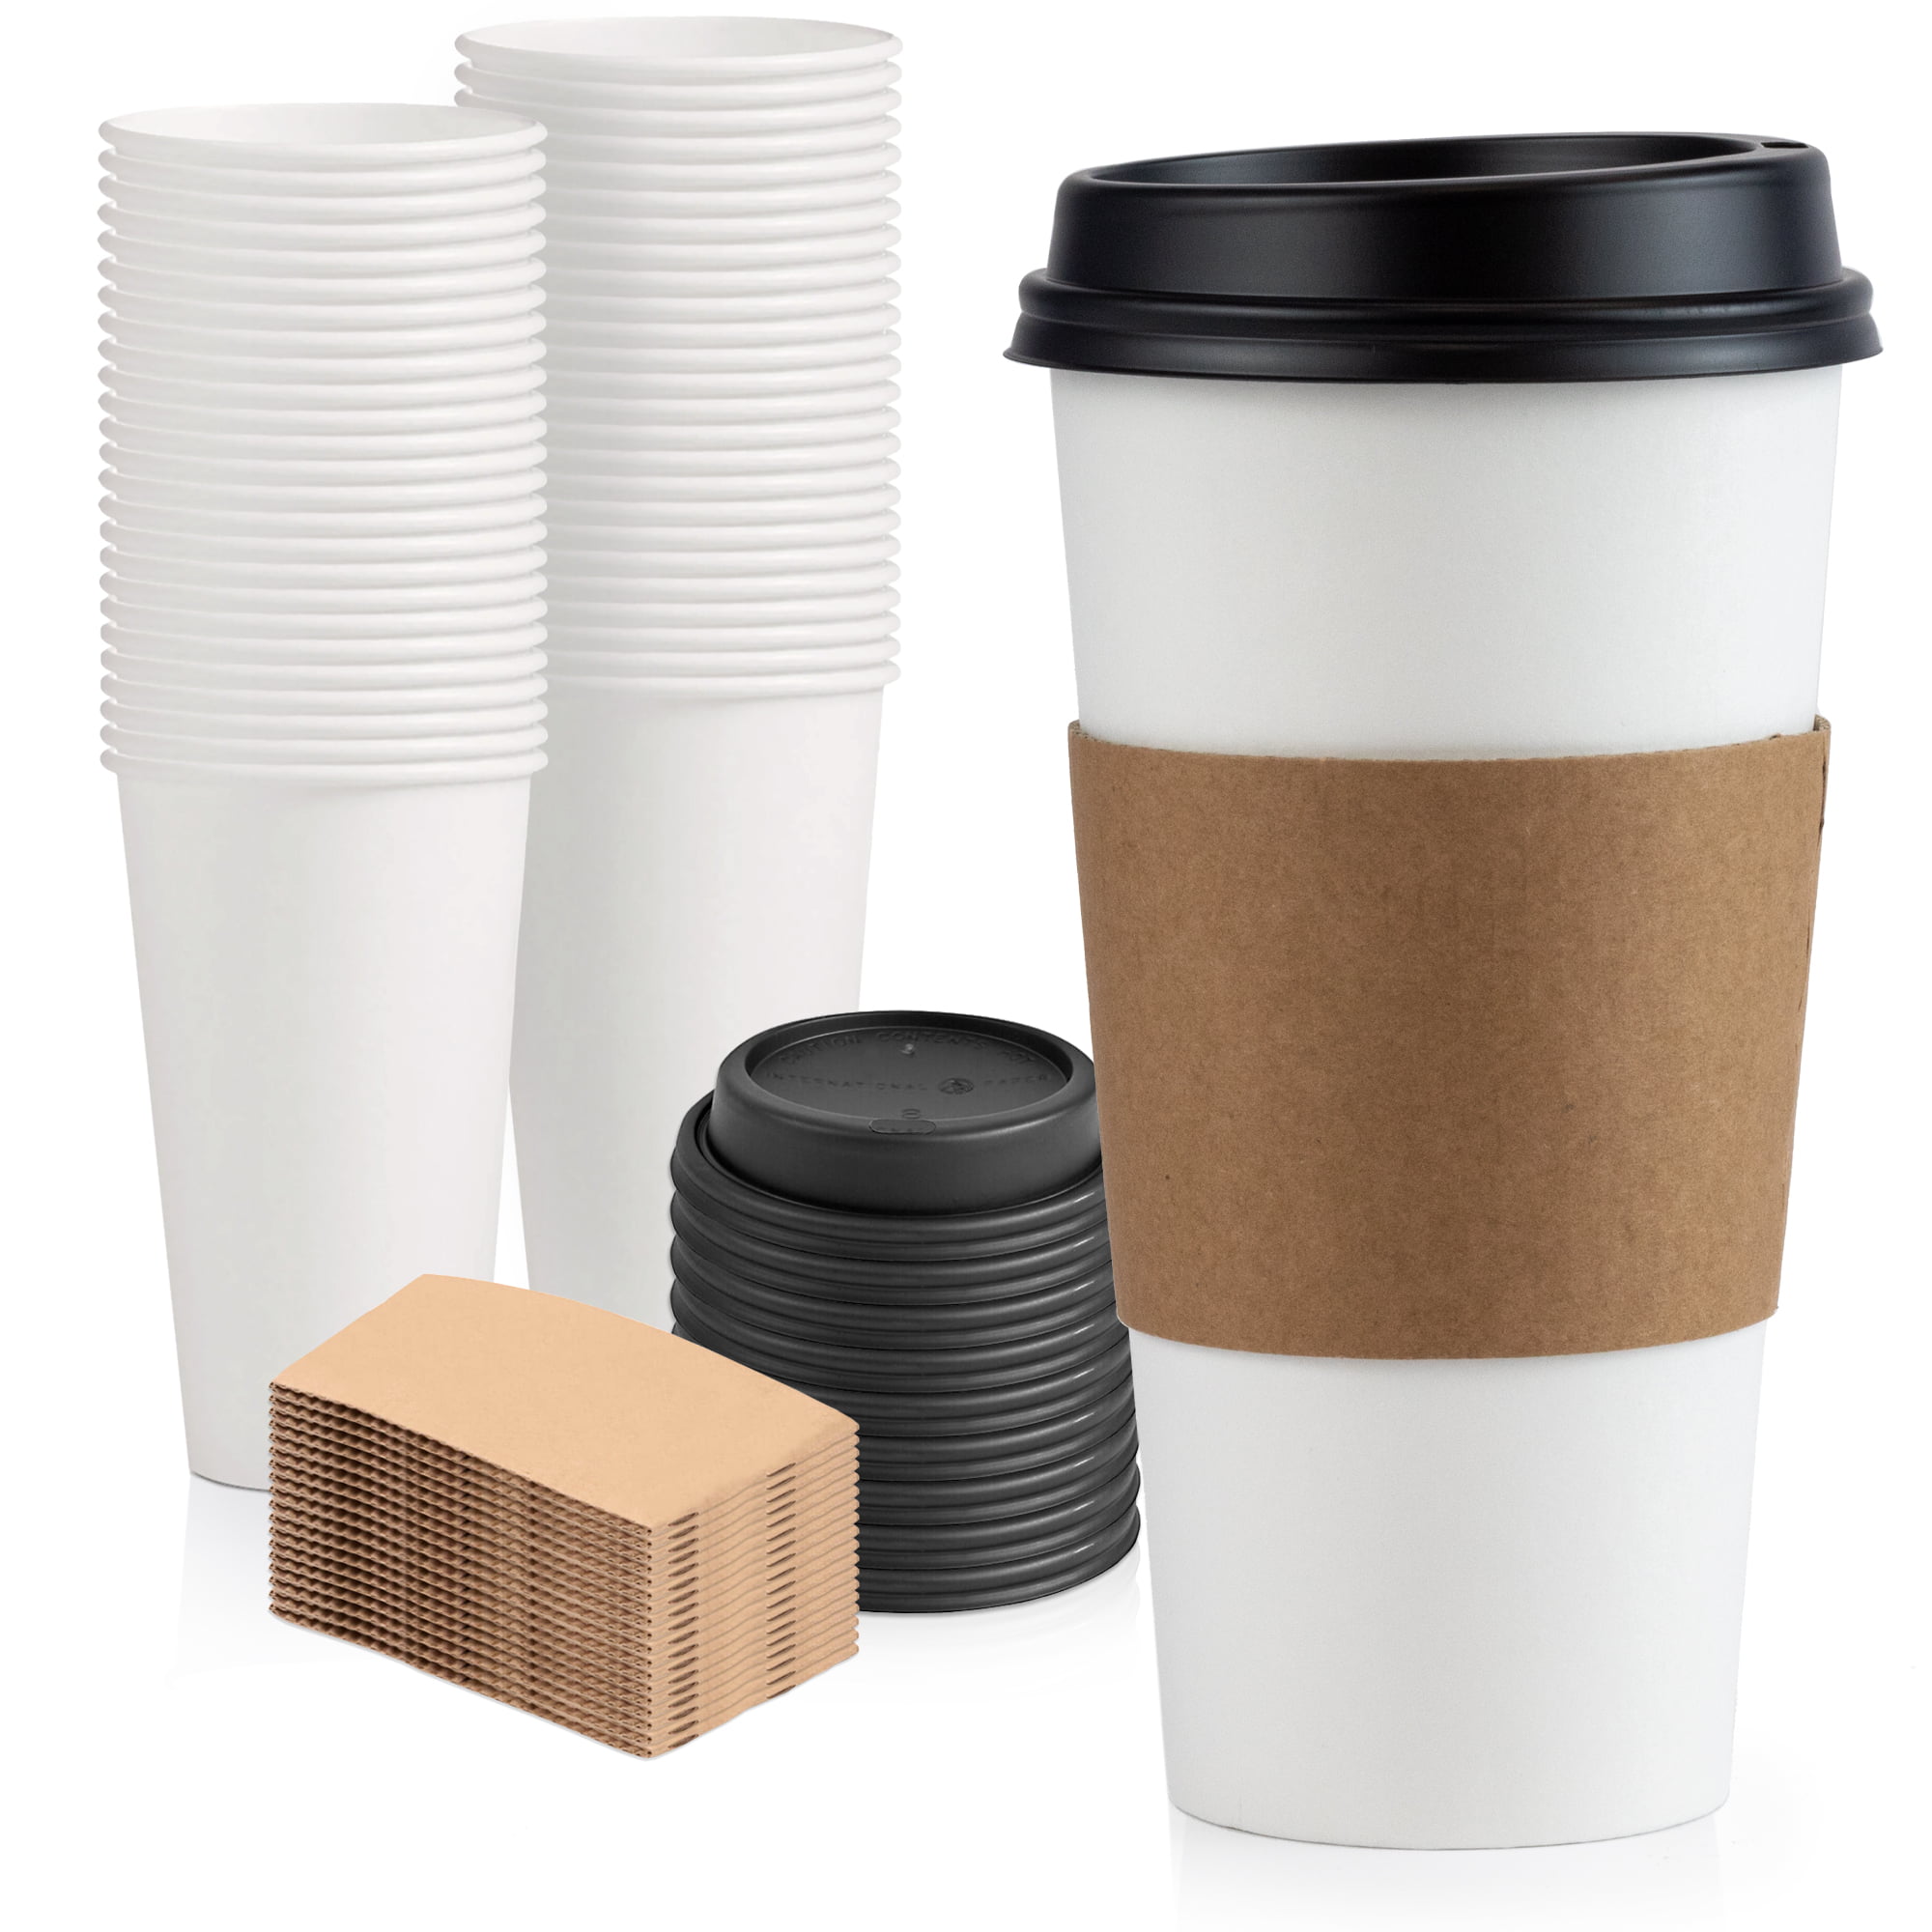 Work Café 100 x 20oz Single Wall White Paper Cups for Hot & Cold Drinks Premium Disposable Coffee/Tea Paper Cups Perfect for Your Home Parties or Outdoors. 